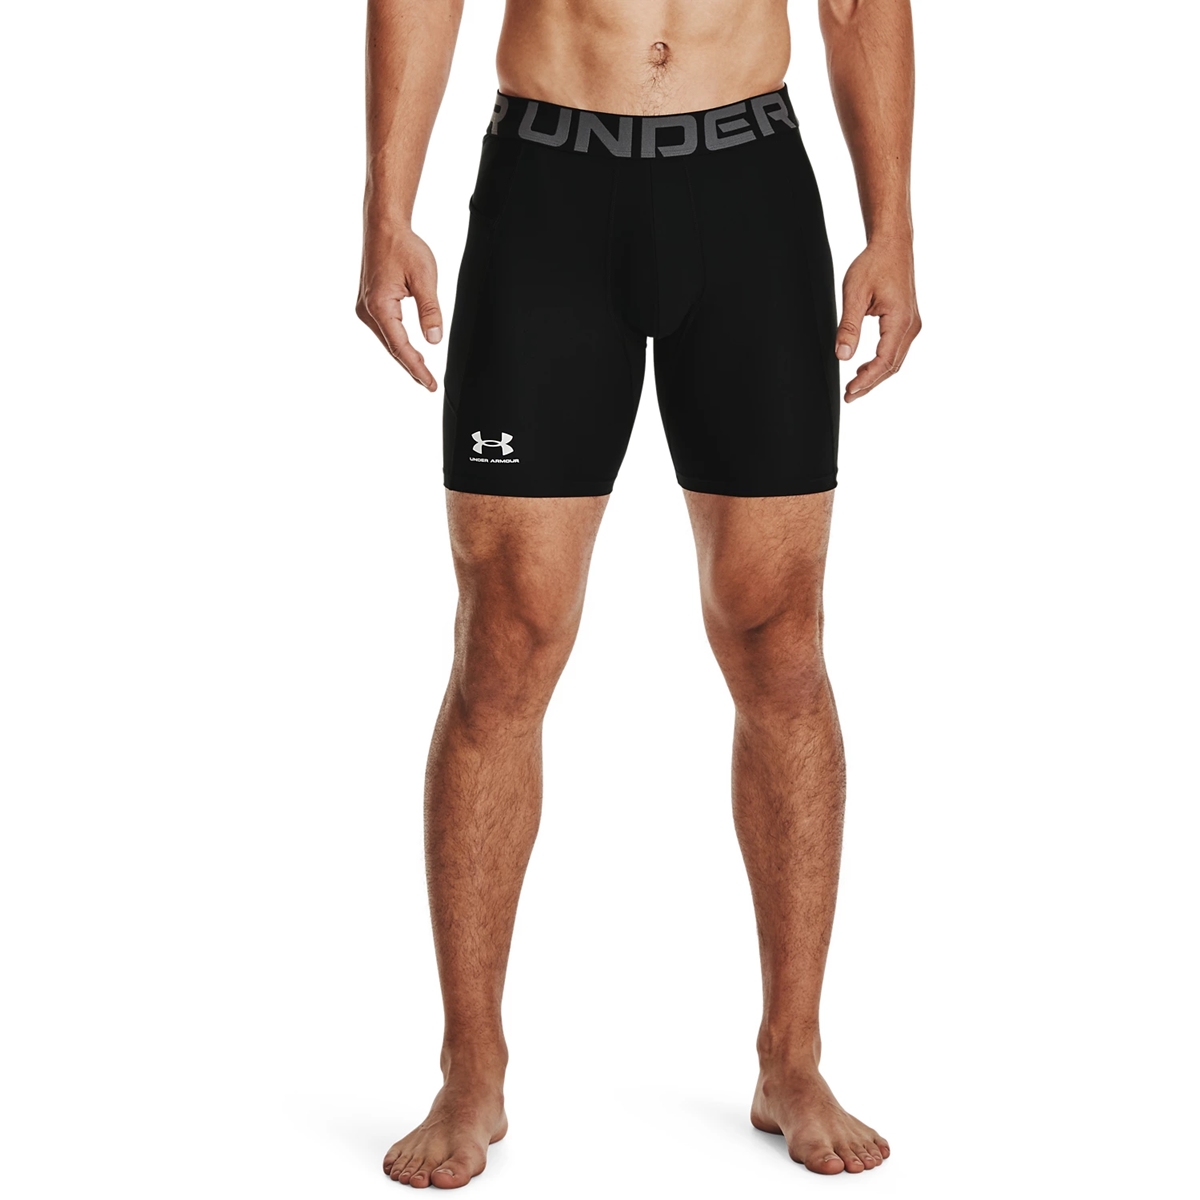 15 Incredible Men’s Compression Shorts For 2023